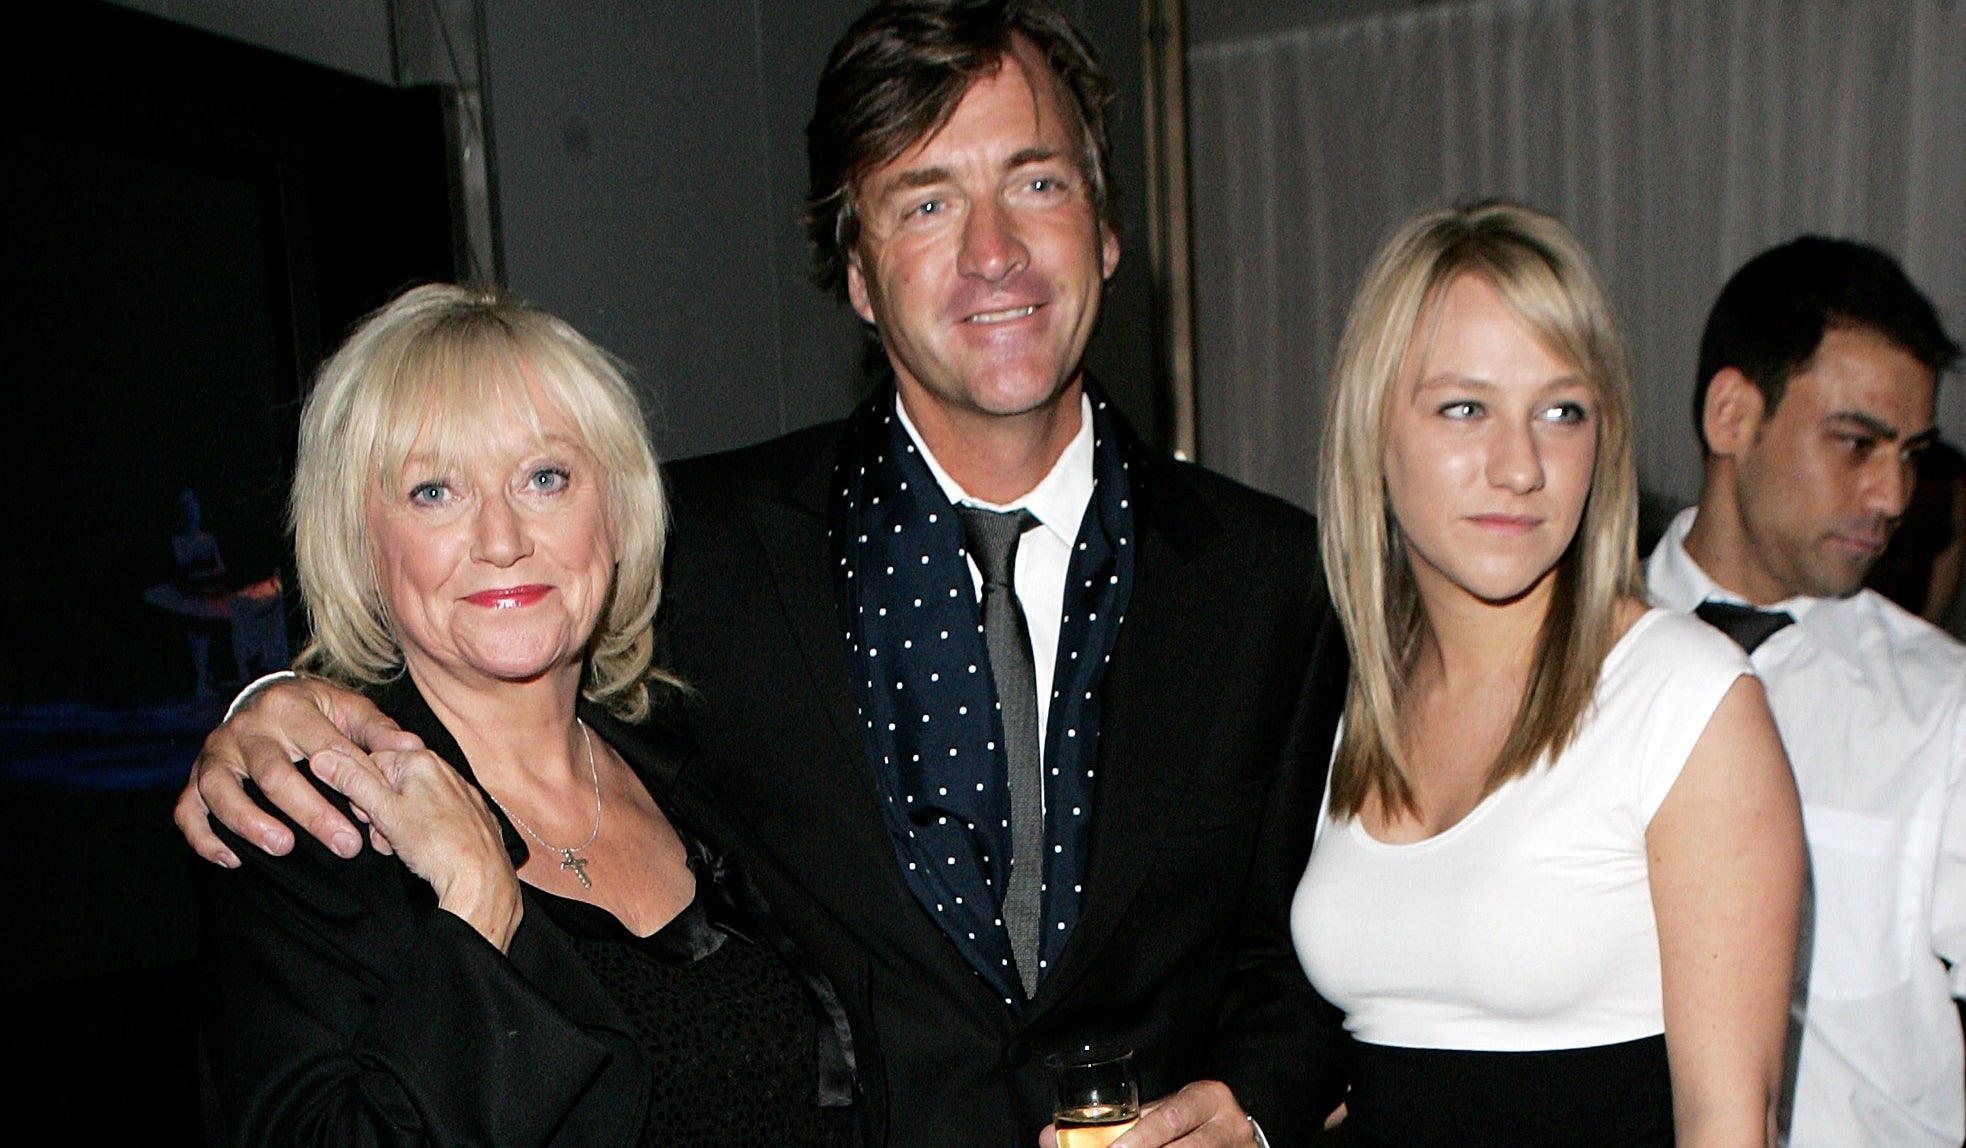 Richard Madeley said he would contact the police over rape threats made to his daughter Chloe on Twitter